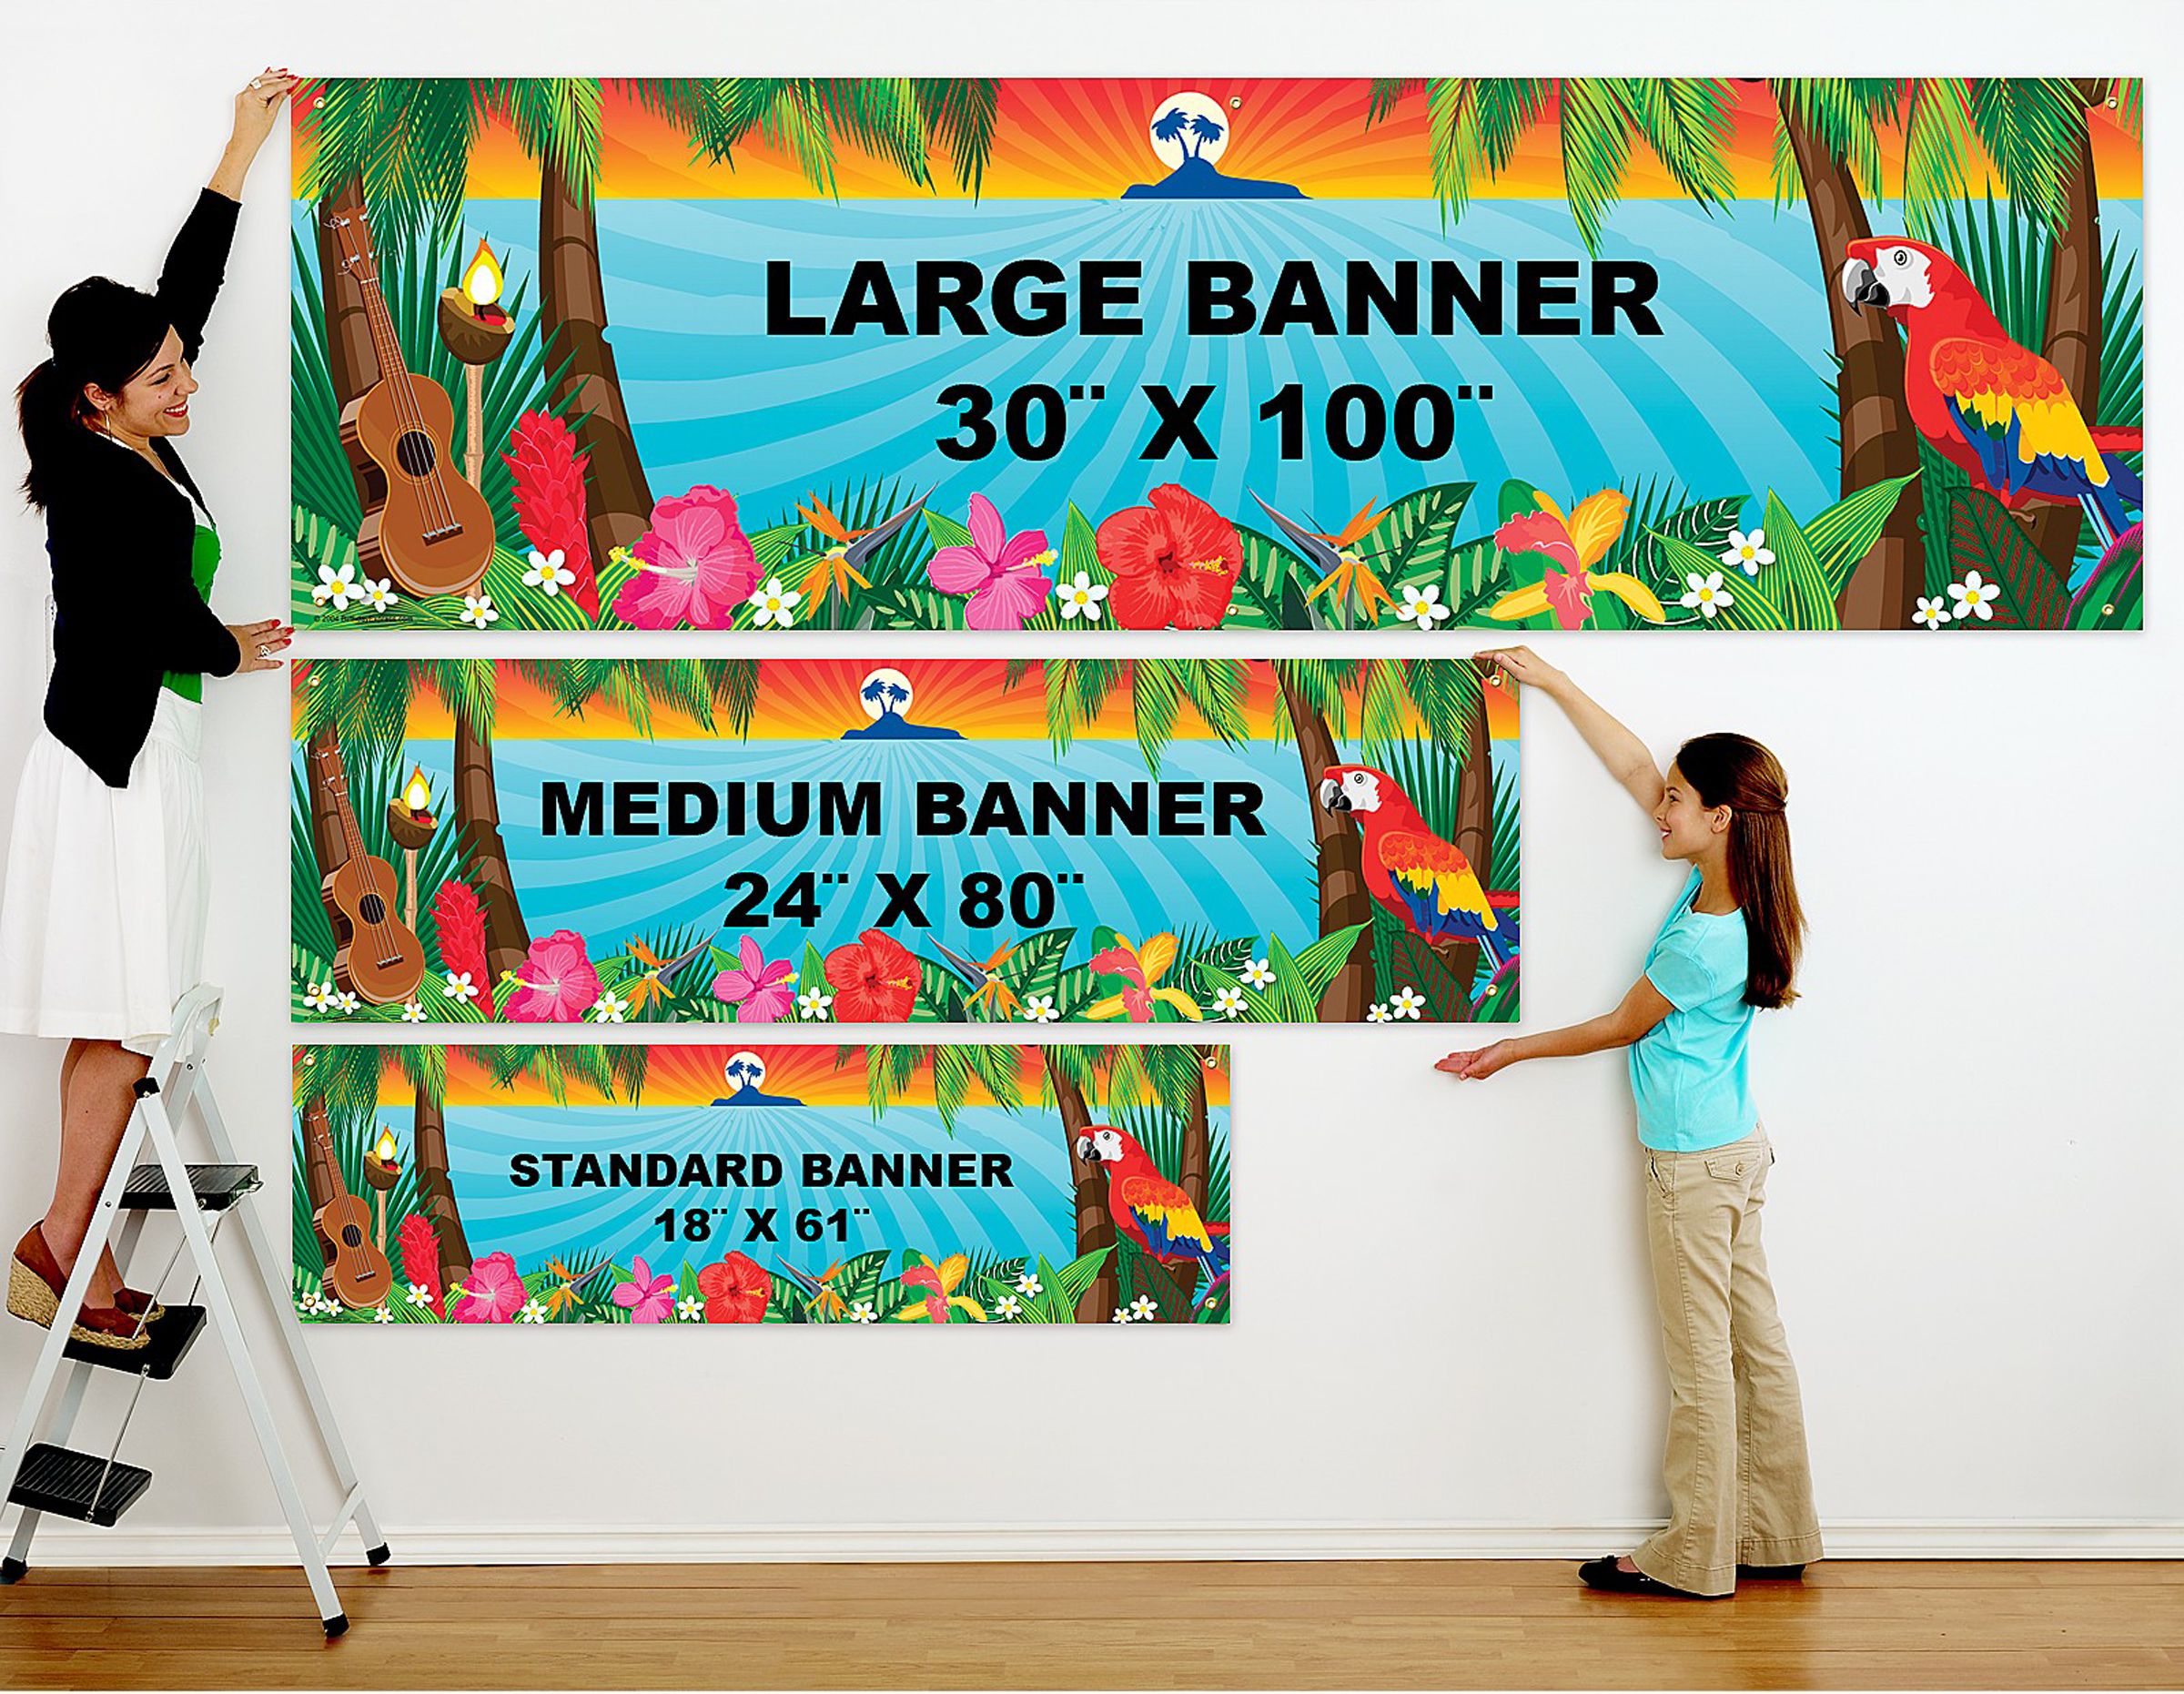 How Banners Are Printed